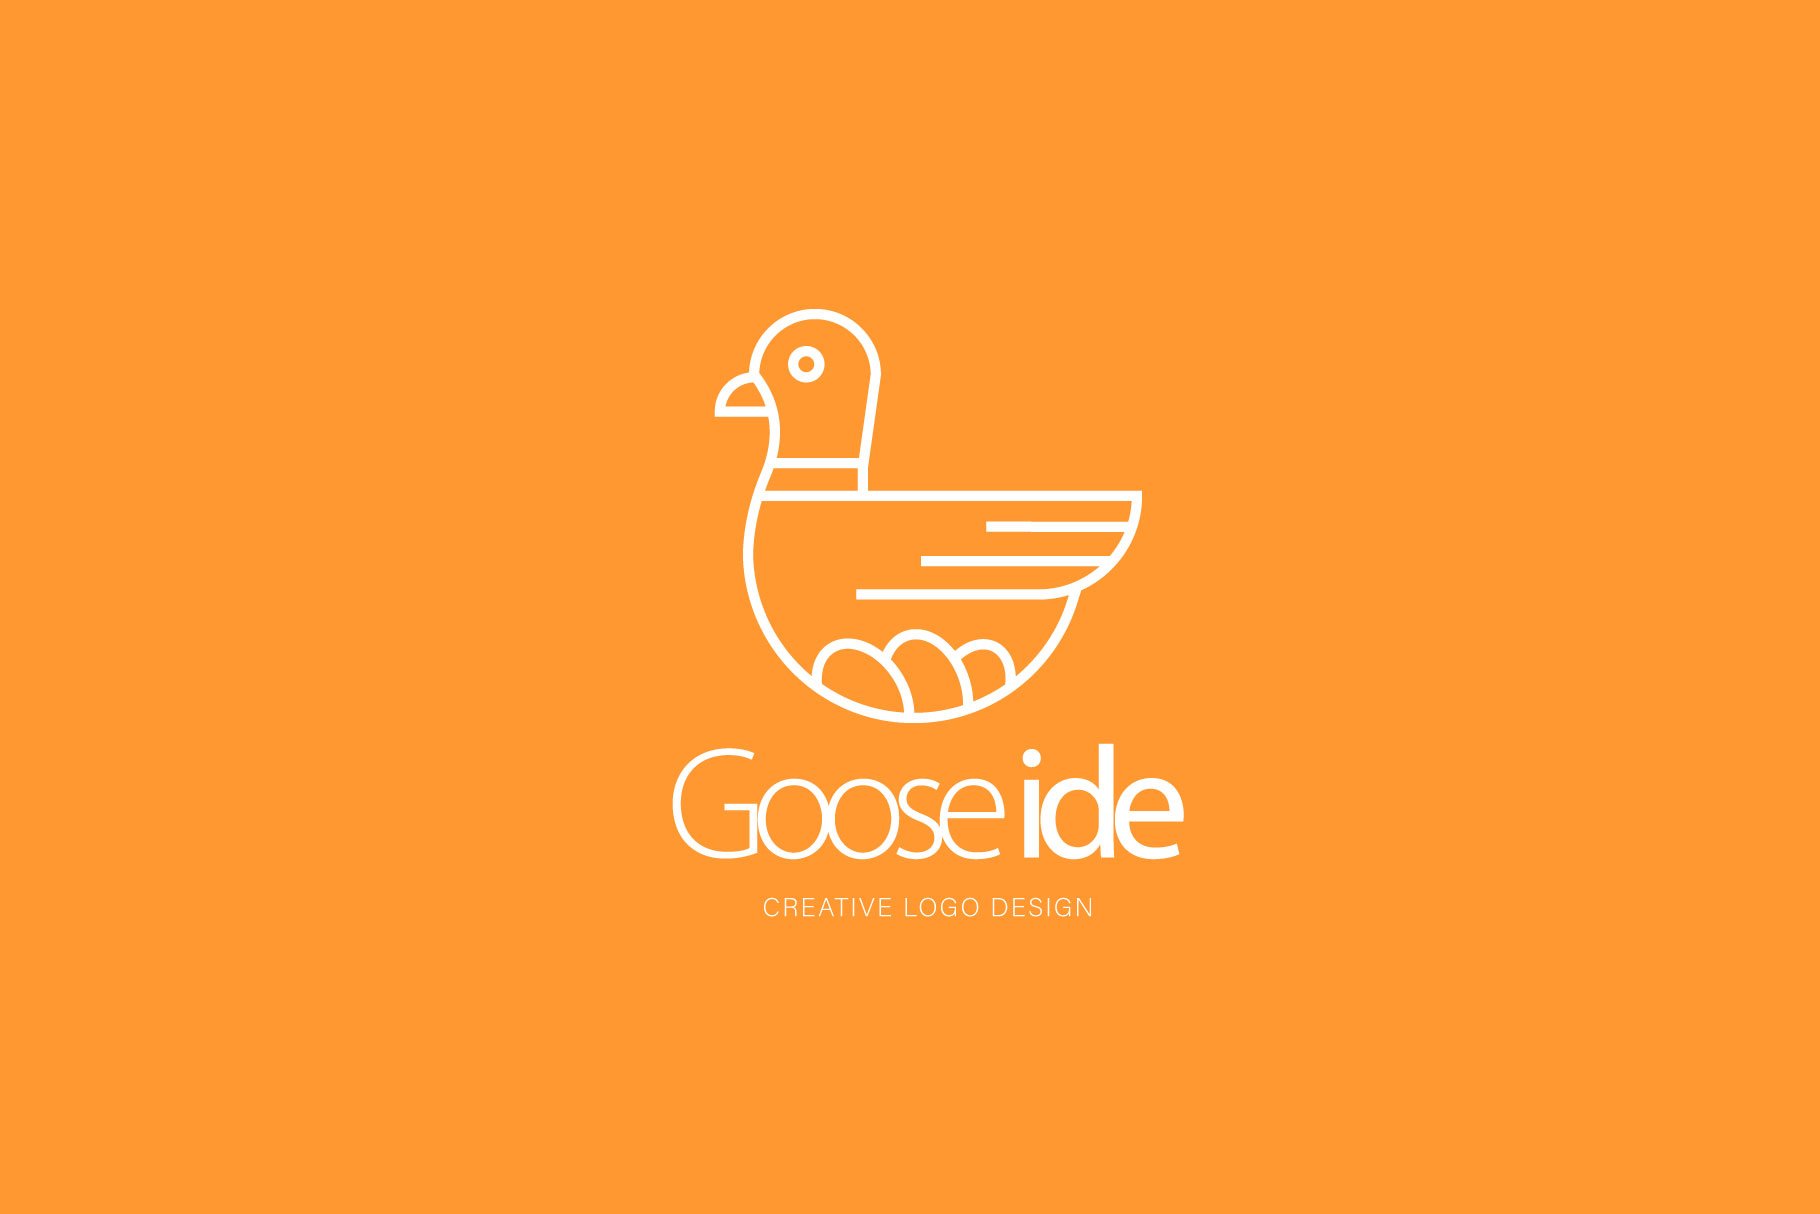 Orange background with white outline goose.